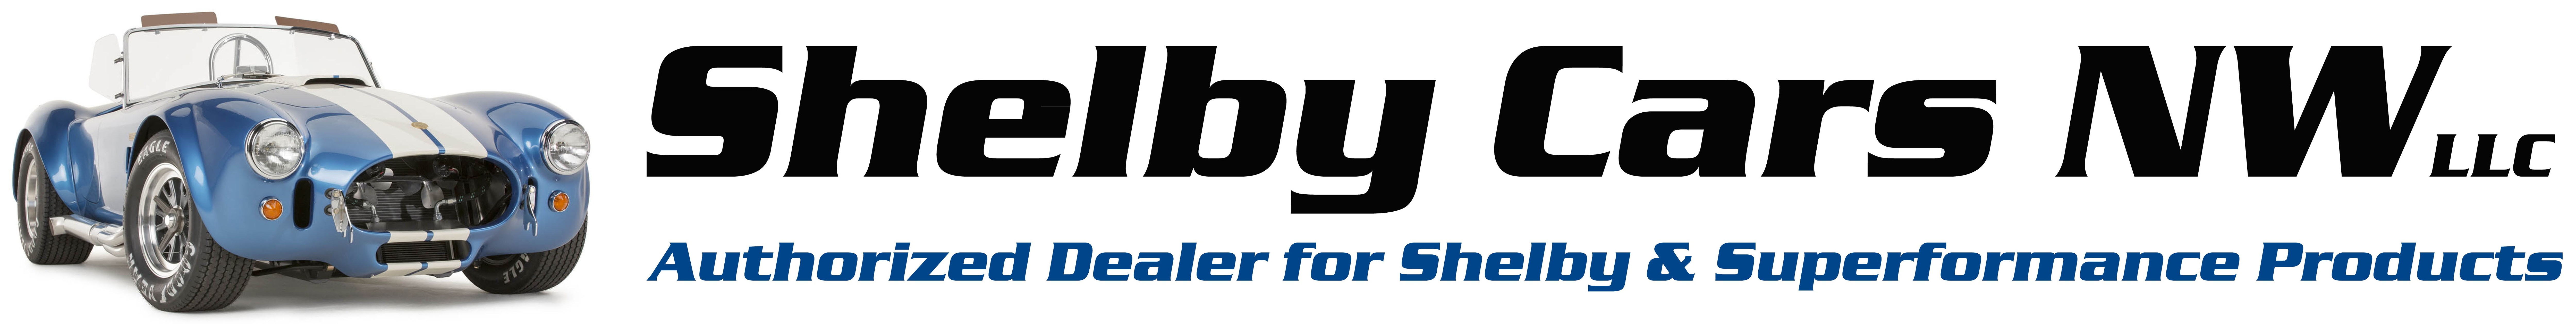 Title Shelby cars north west, factory authorized dealer for shelby automobiles